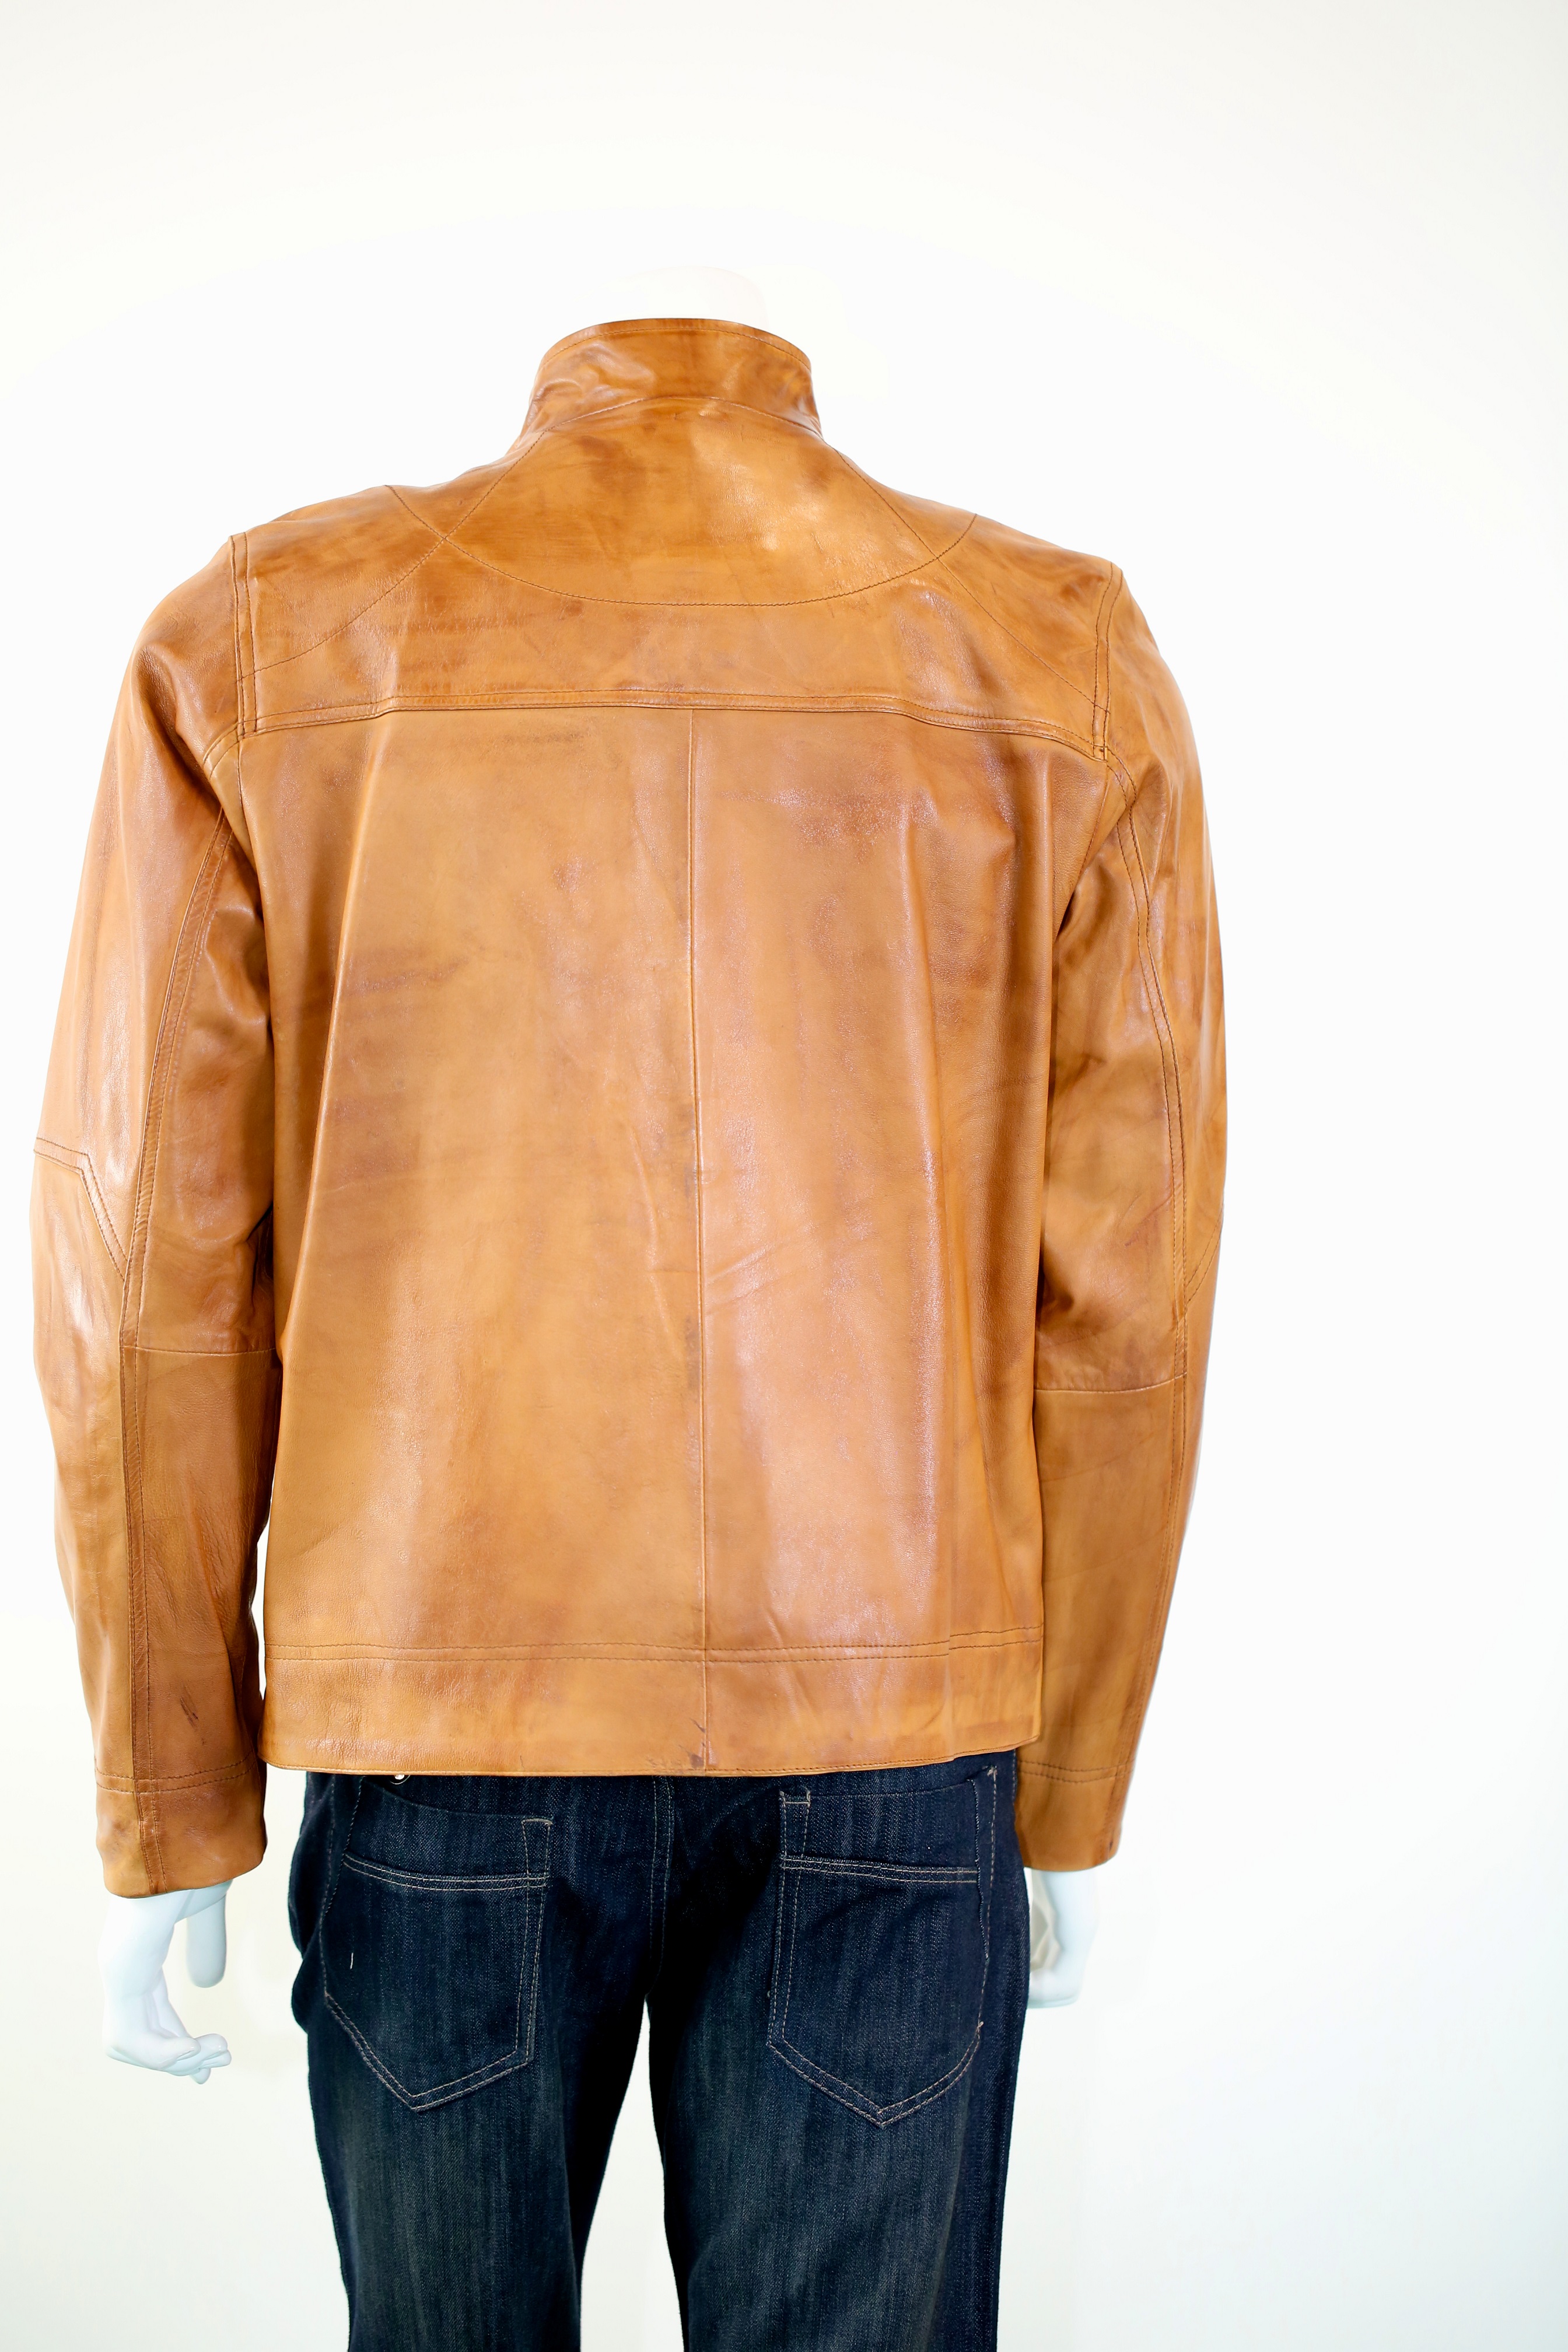 Men's Tan Leather Jacket - Radford Leather Fashions-Quality Leather and ...